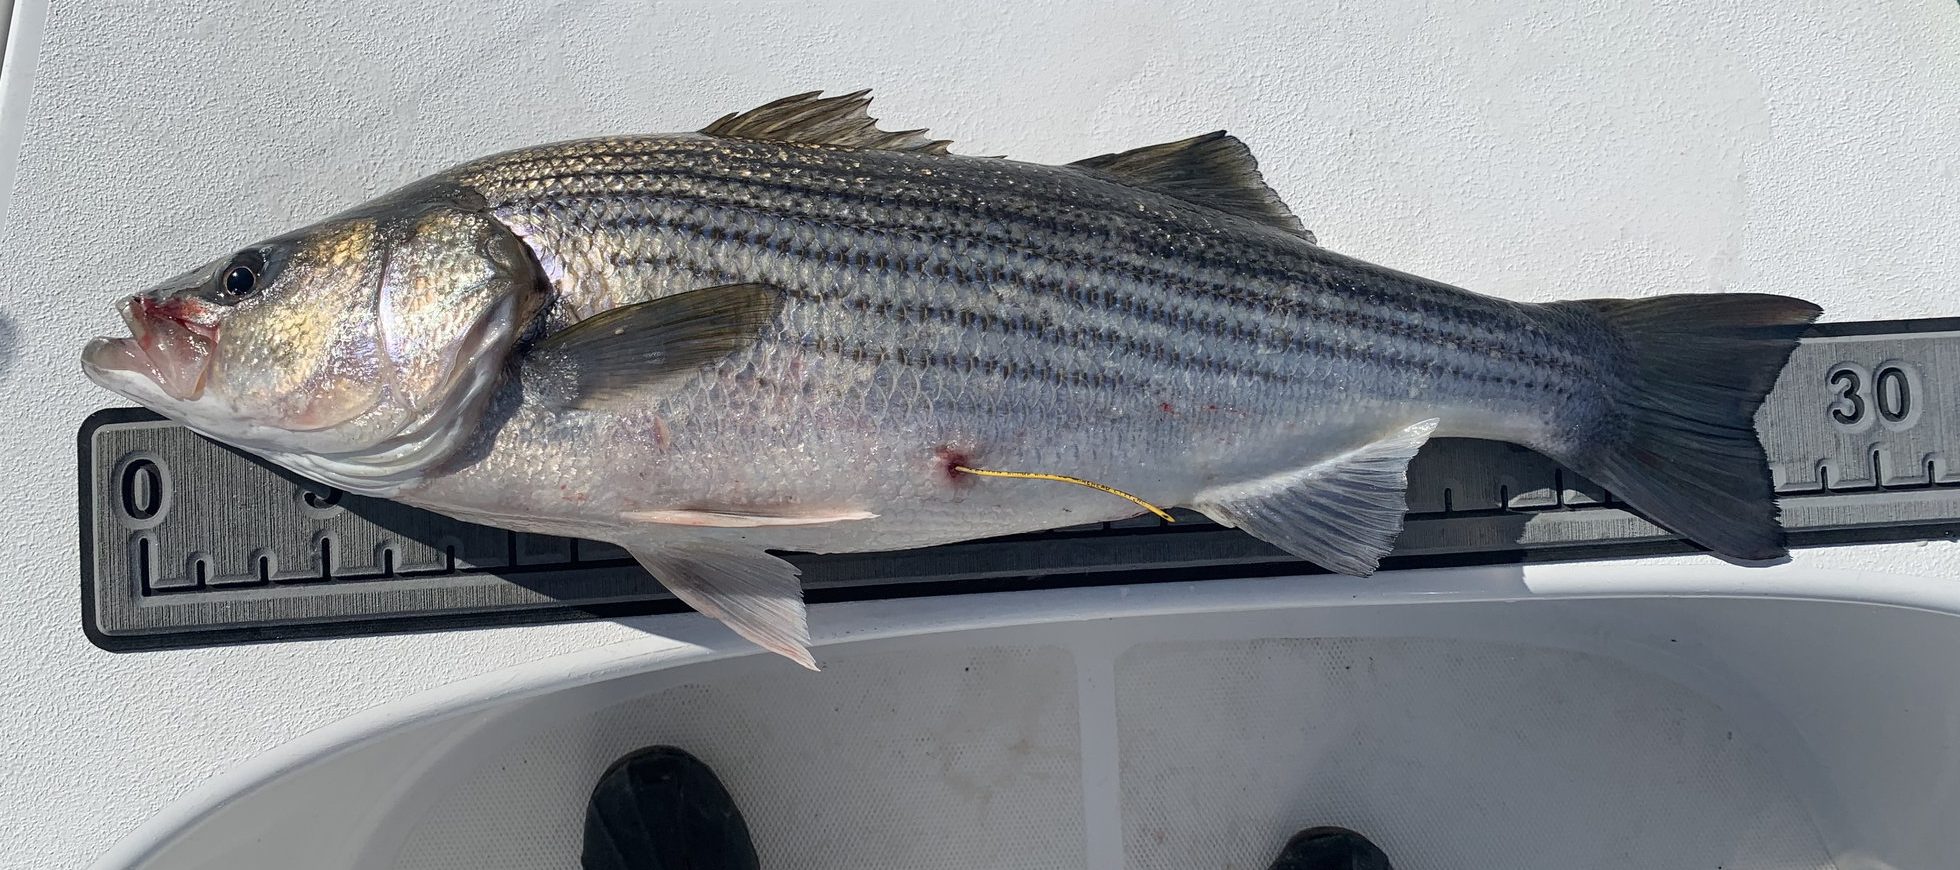 Town Hall second step in the Department of Fish and Wildlife's process to  review the proposed striped bass slot limit - NCGASA